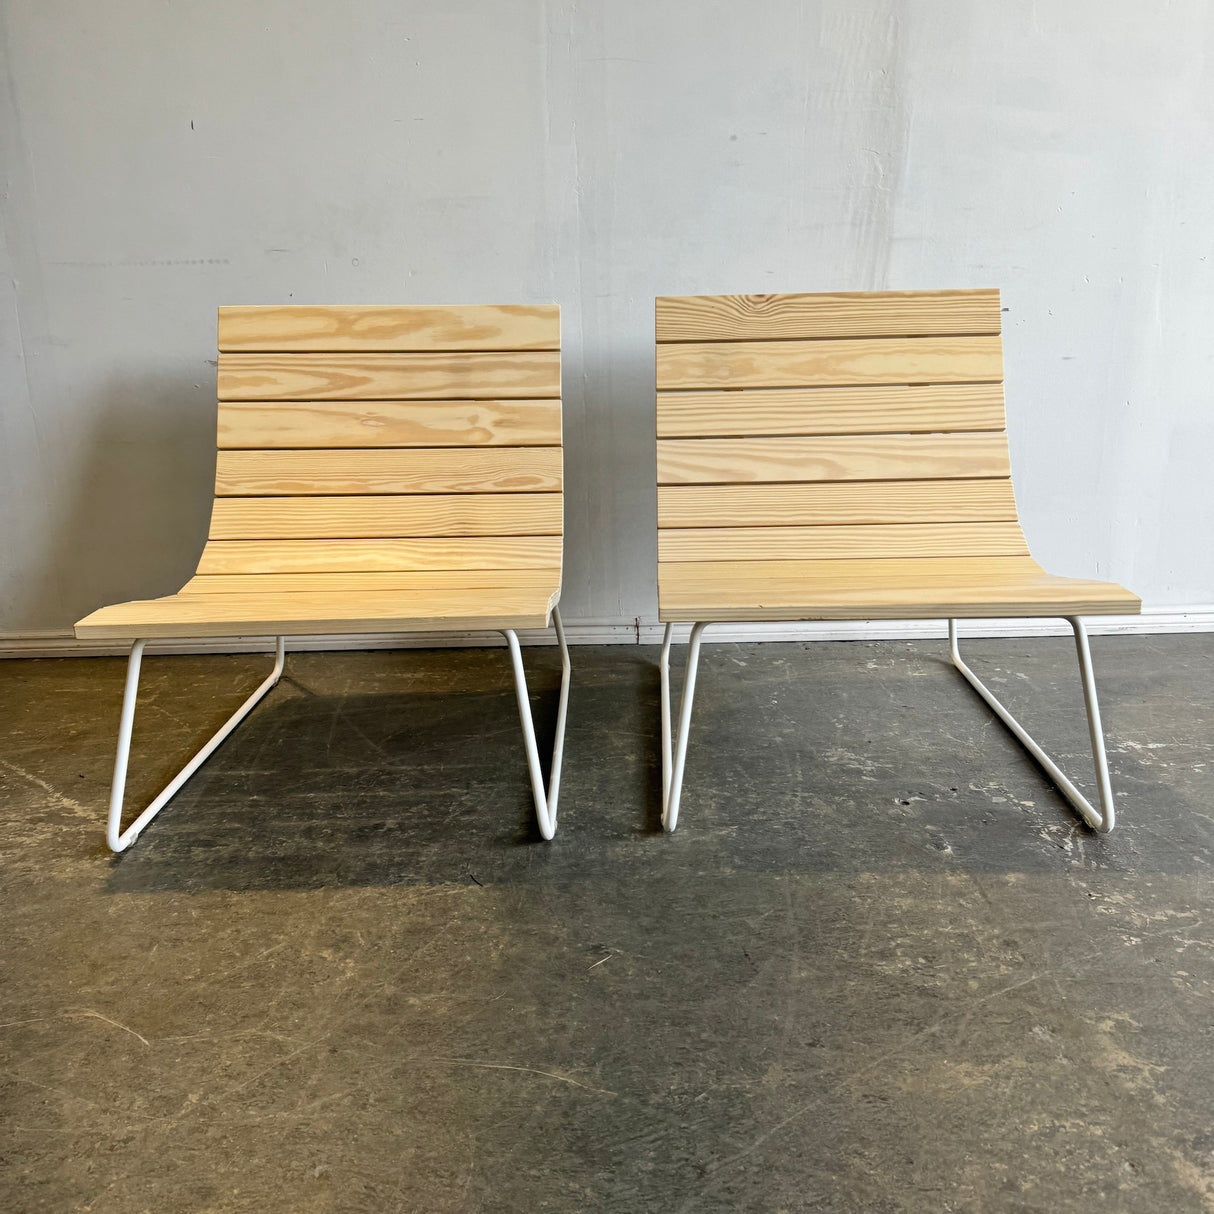 Plank by Eric Pfeiffer and Council Set of 2 Indoor/outdoor lounger